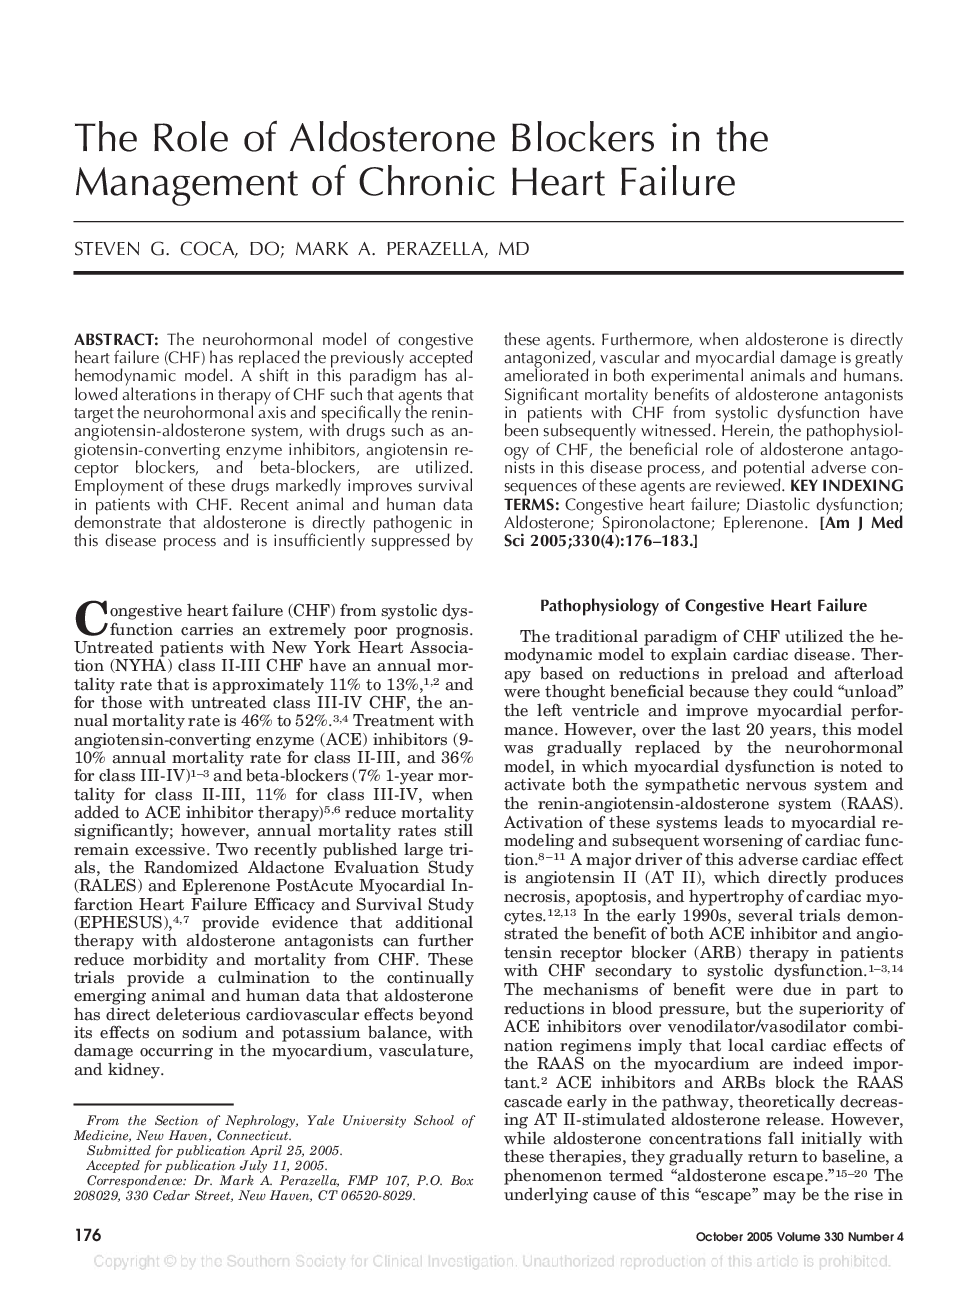 The Role of Aldosterone Blockers in the Management of Chronic Heart Failure